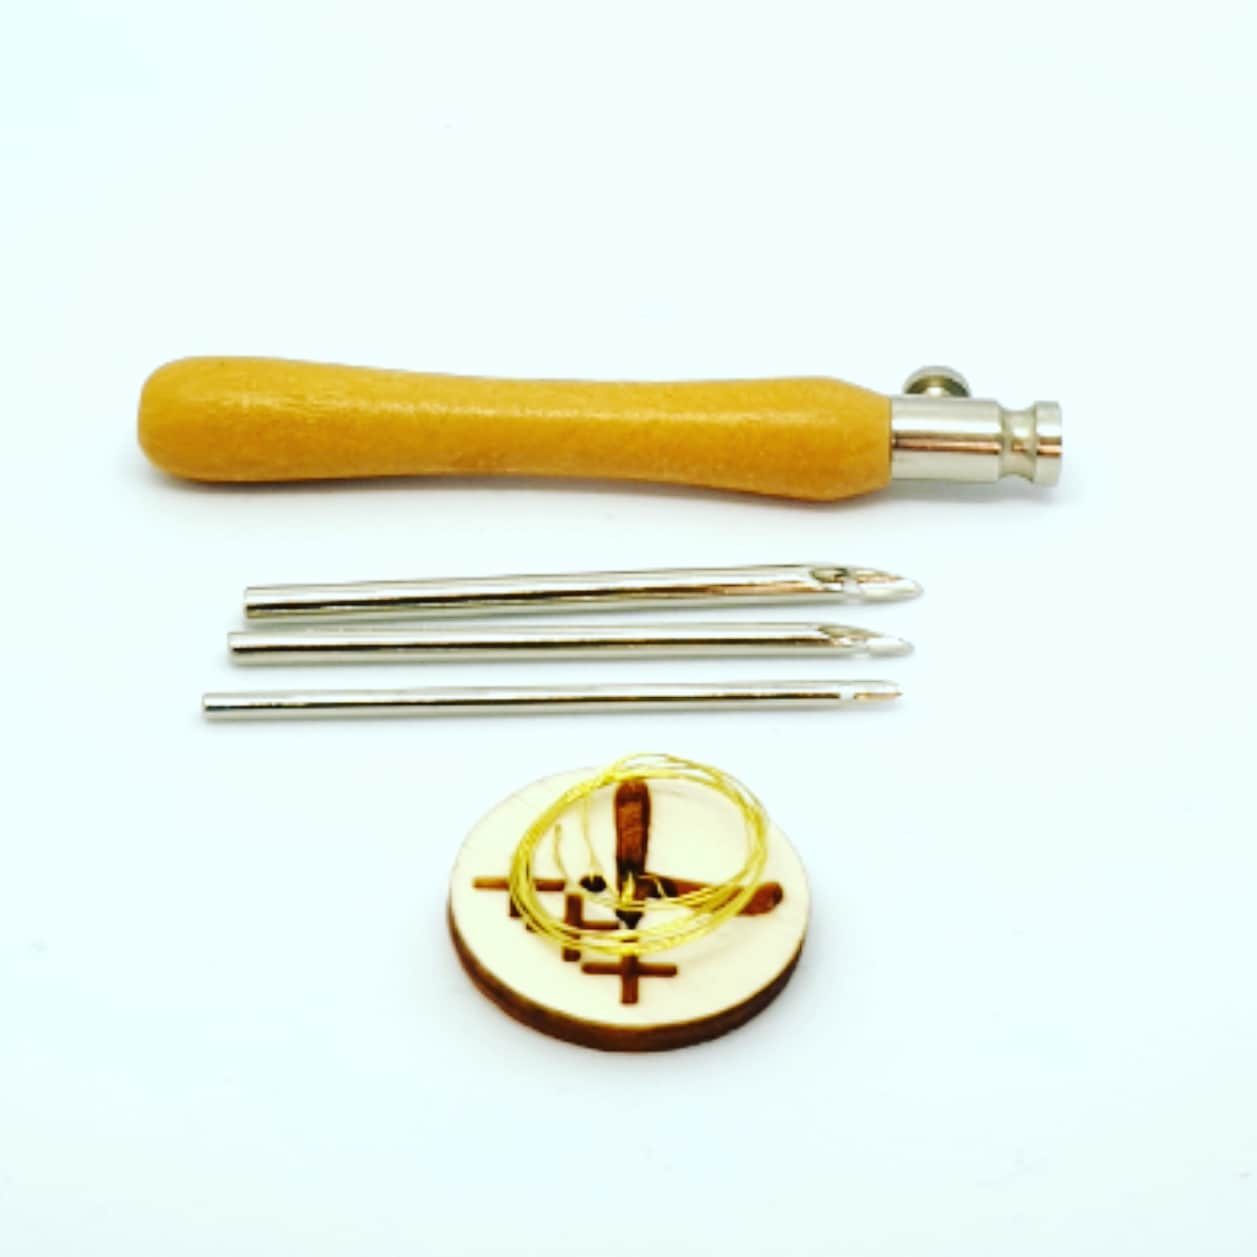 Lets Learn about Different Punch Needles! Number 1: the lavor punch needle/ 3 needle punch Needle